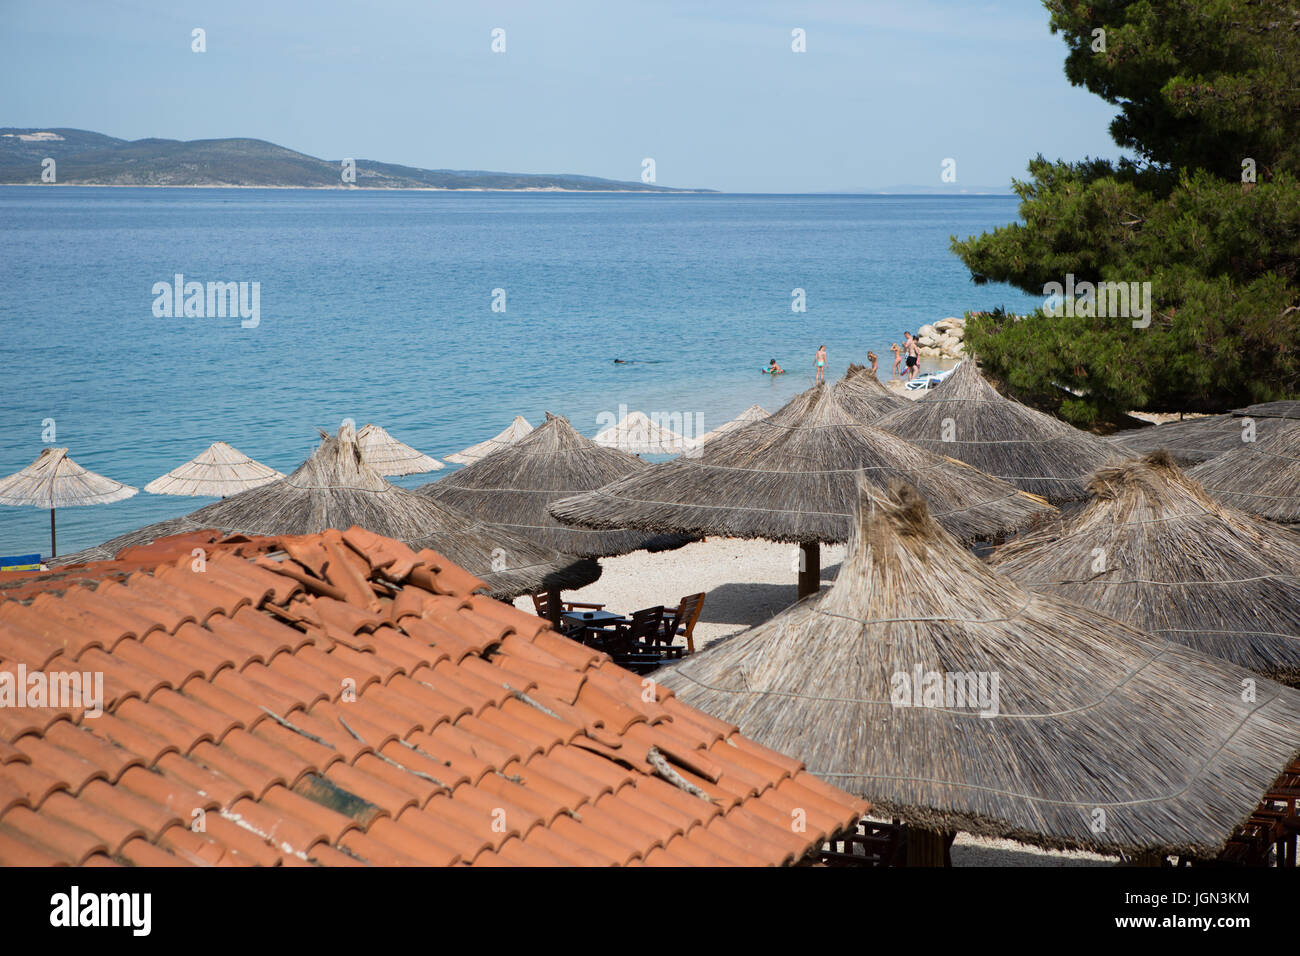 MAKARSKA,CROTIA - 16 JUNE,2017: Summer restaurant on the beach decorated with sun umbrella made from palm tree leaves.Beautiful landscape with deep bl Stock Photo